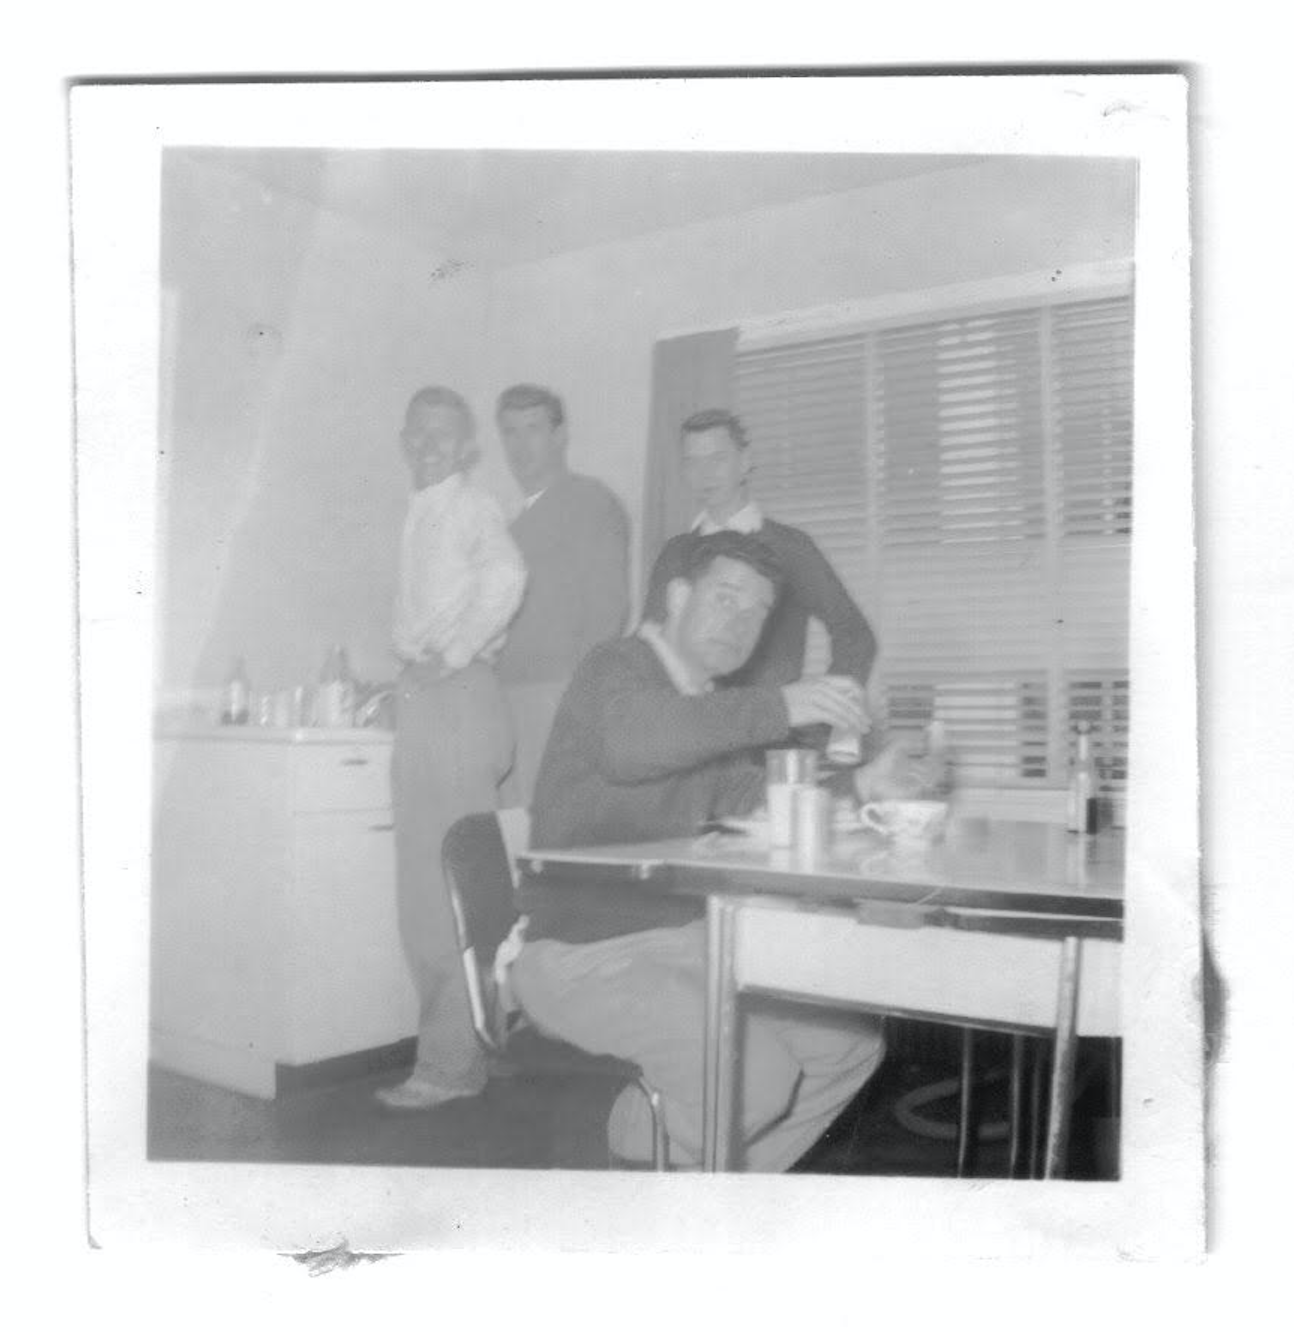  Charlie Bashara enjoying a "home cooked" meal at Deek's house on N. Main Street. Brothers Frank Jordan, Tom Richards, and Pete _____ in background. 